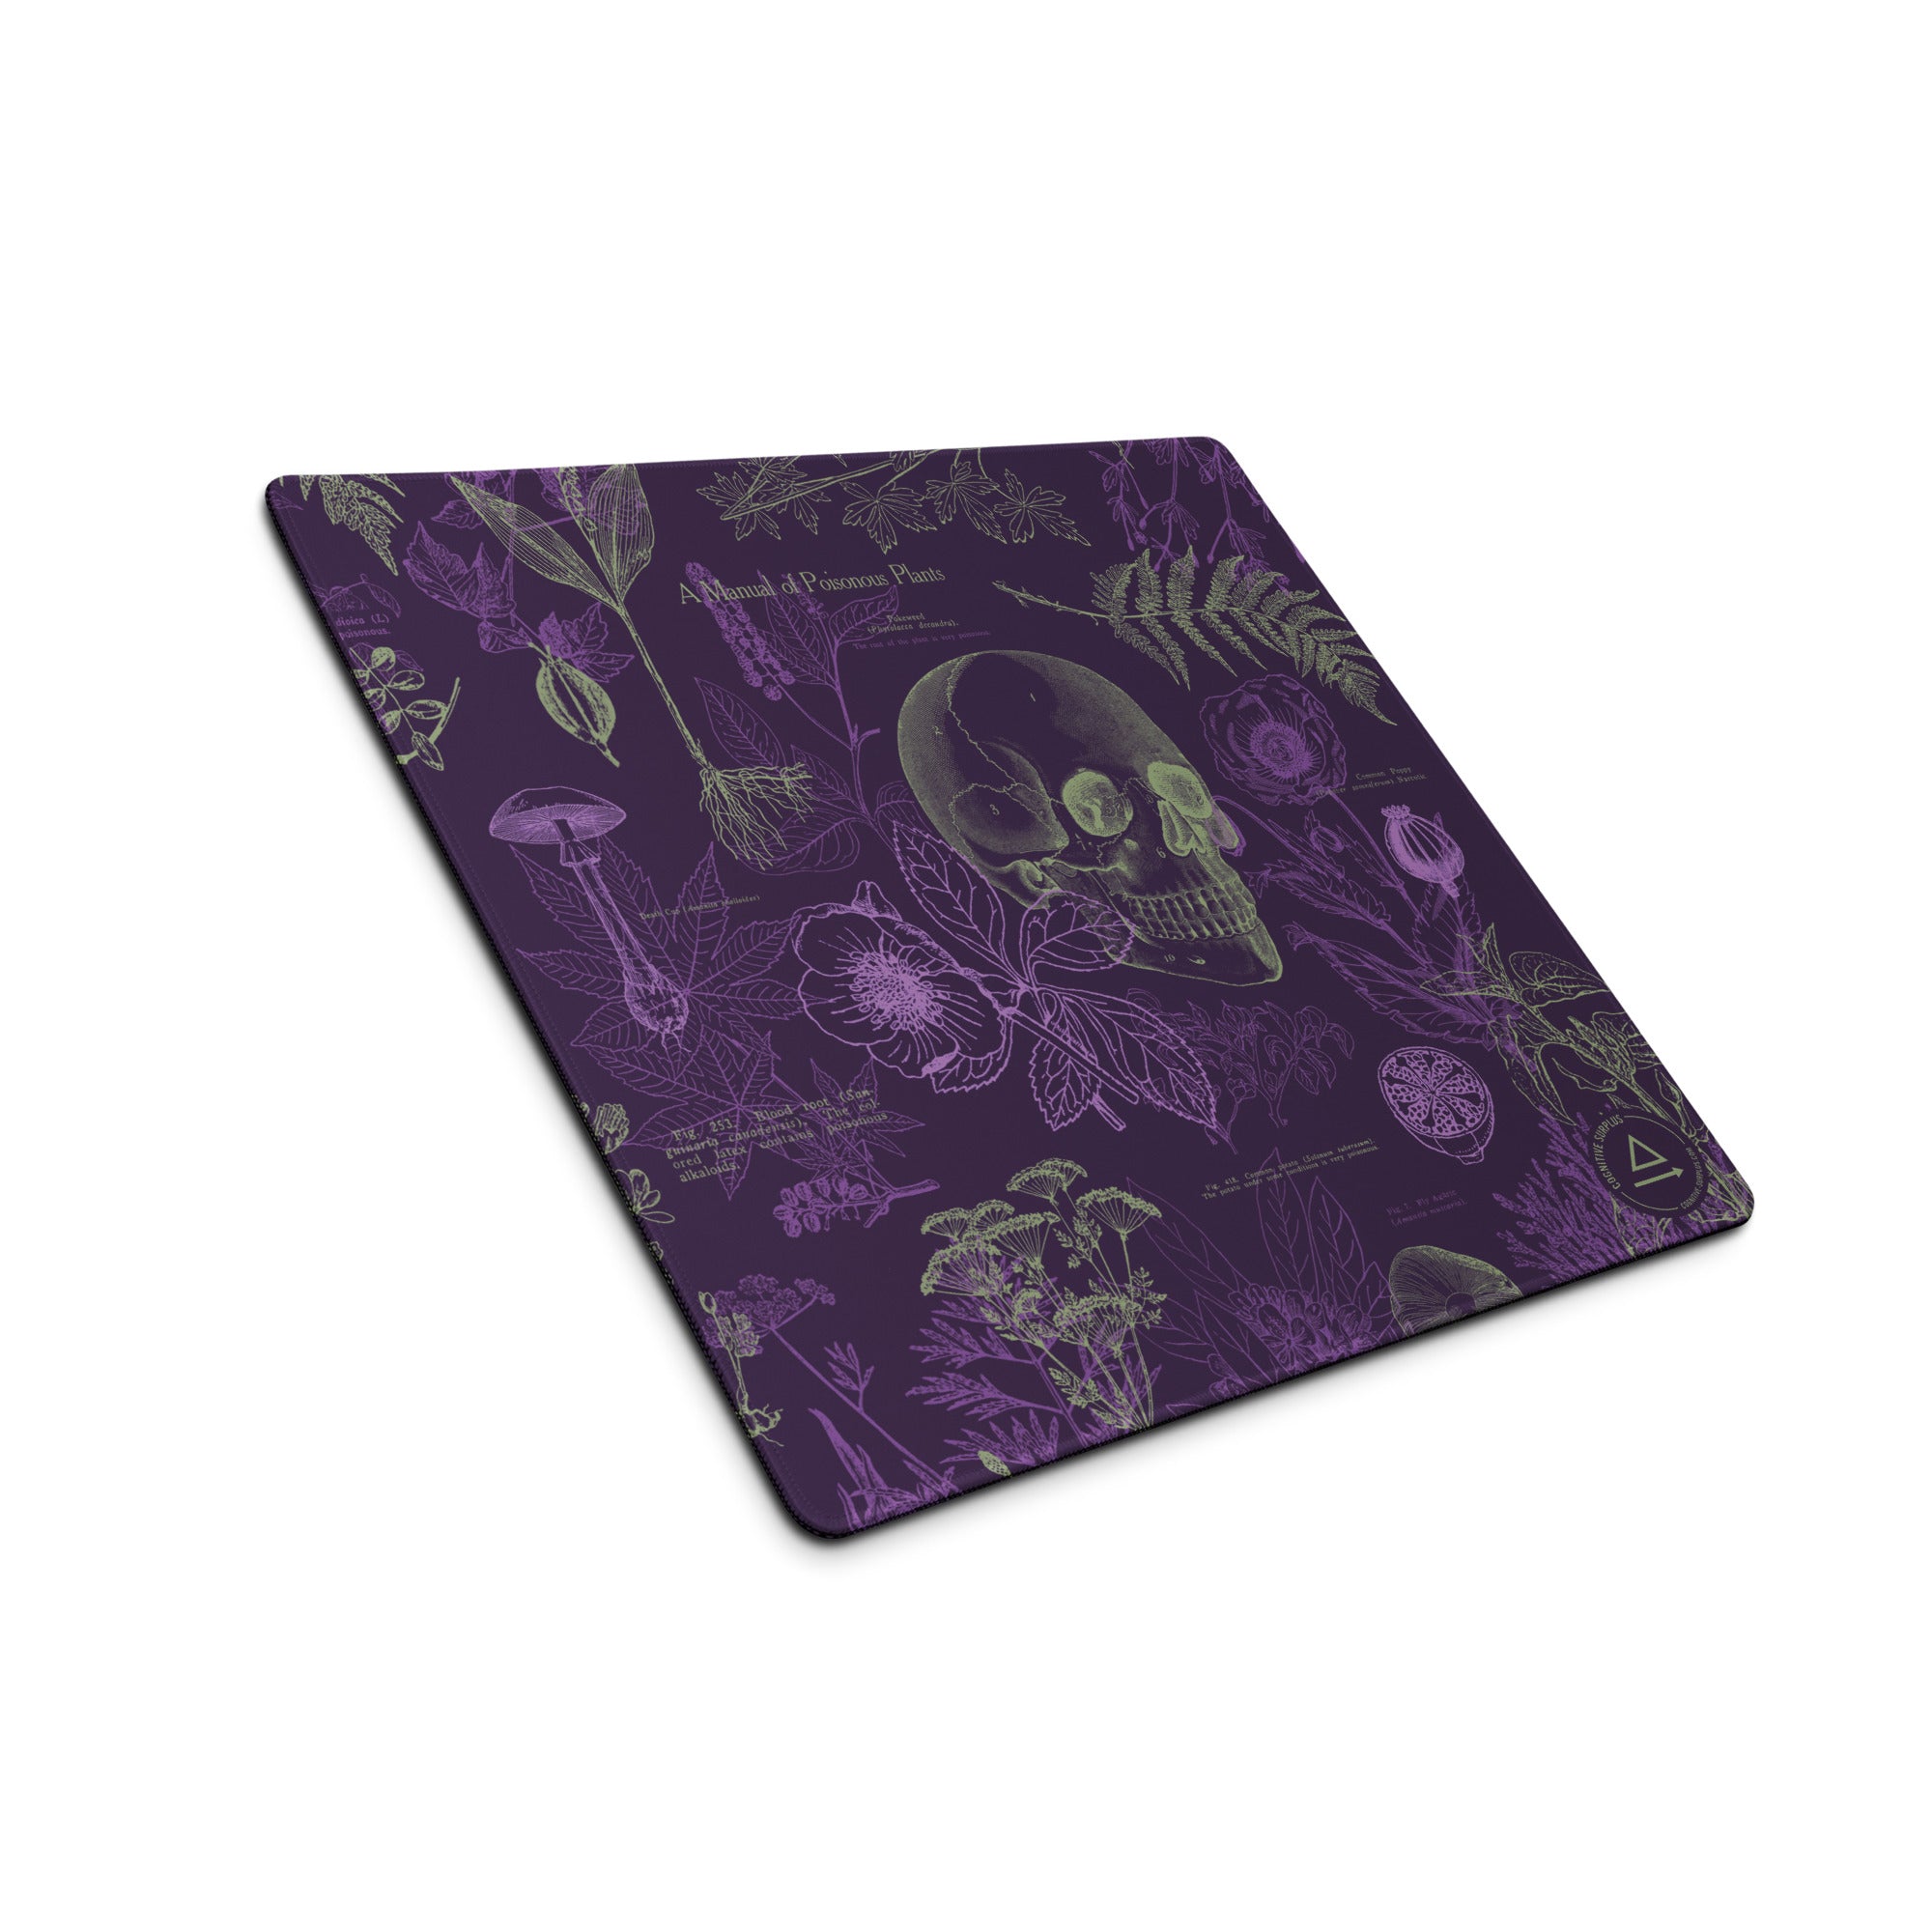 Poisonous Plants Gaming Mouse Pad